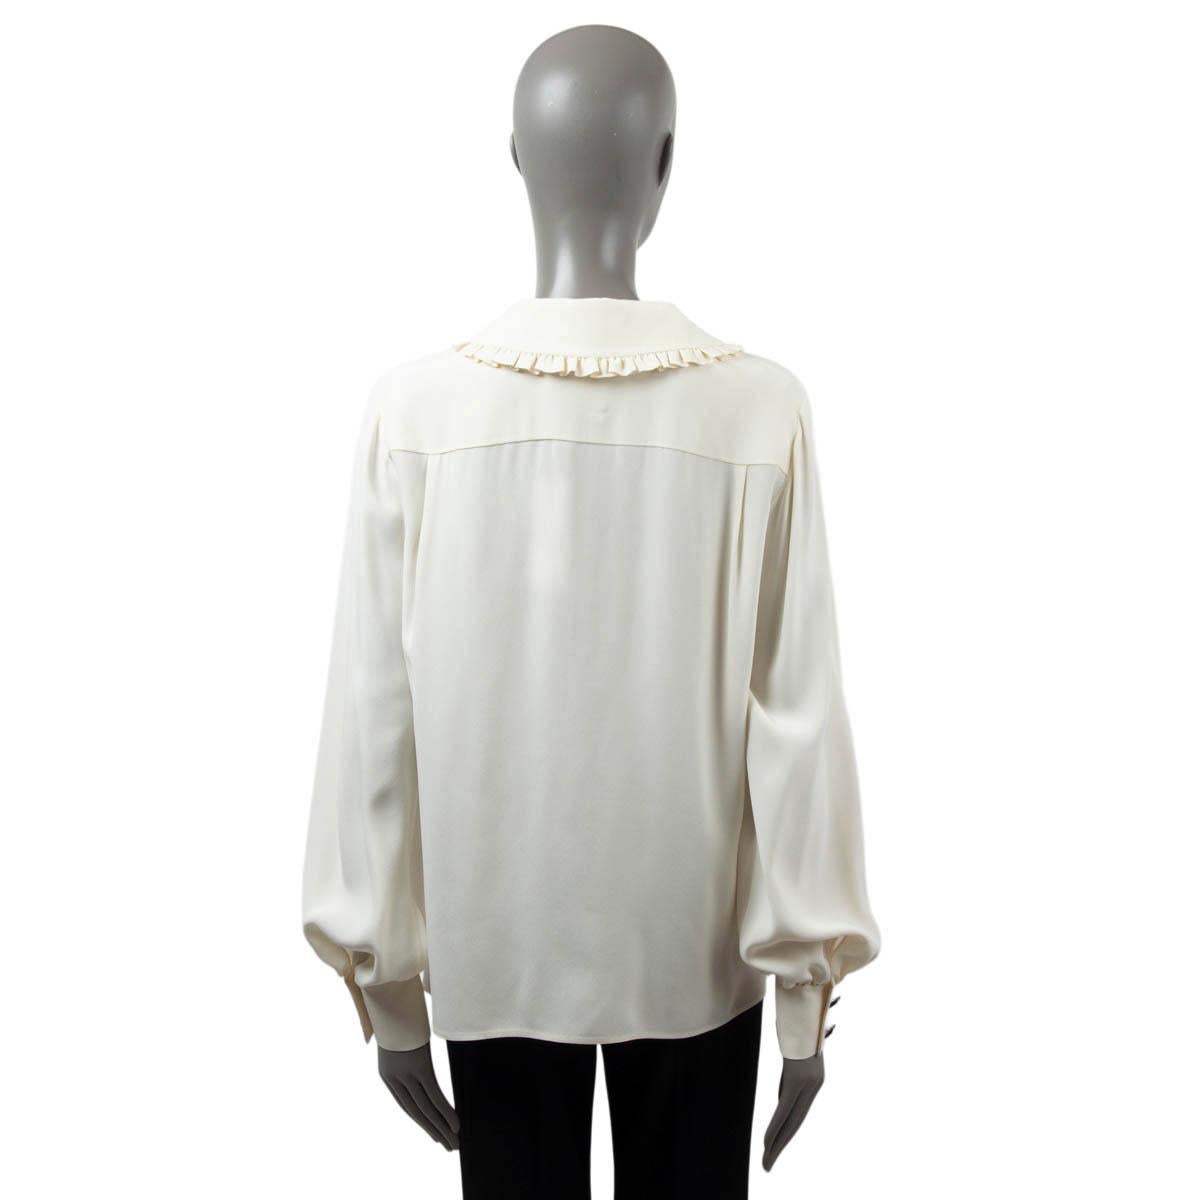 CHANEL ivory silk RUFFLED PETER PAN COLLAR Blouse Shirt 38 S For Sale 1